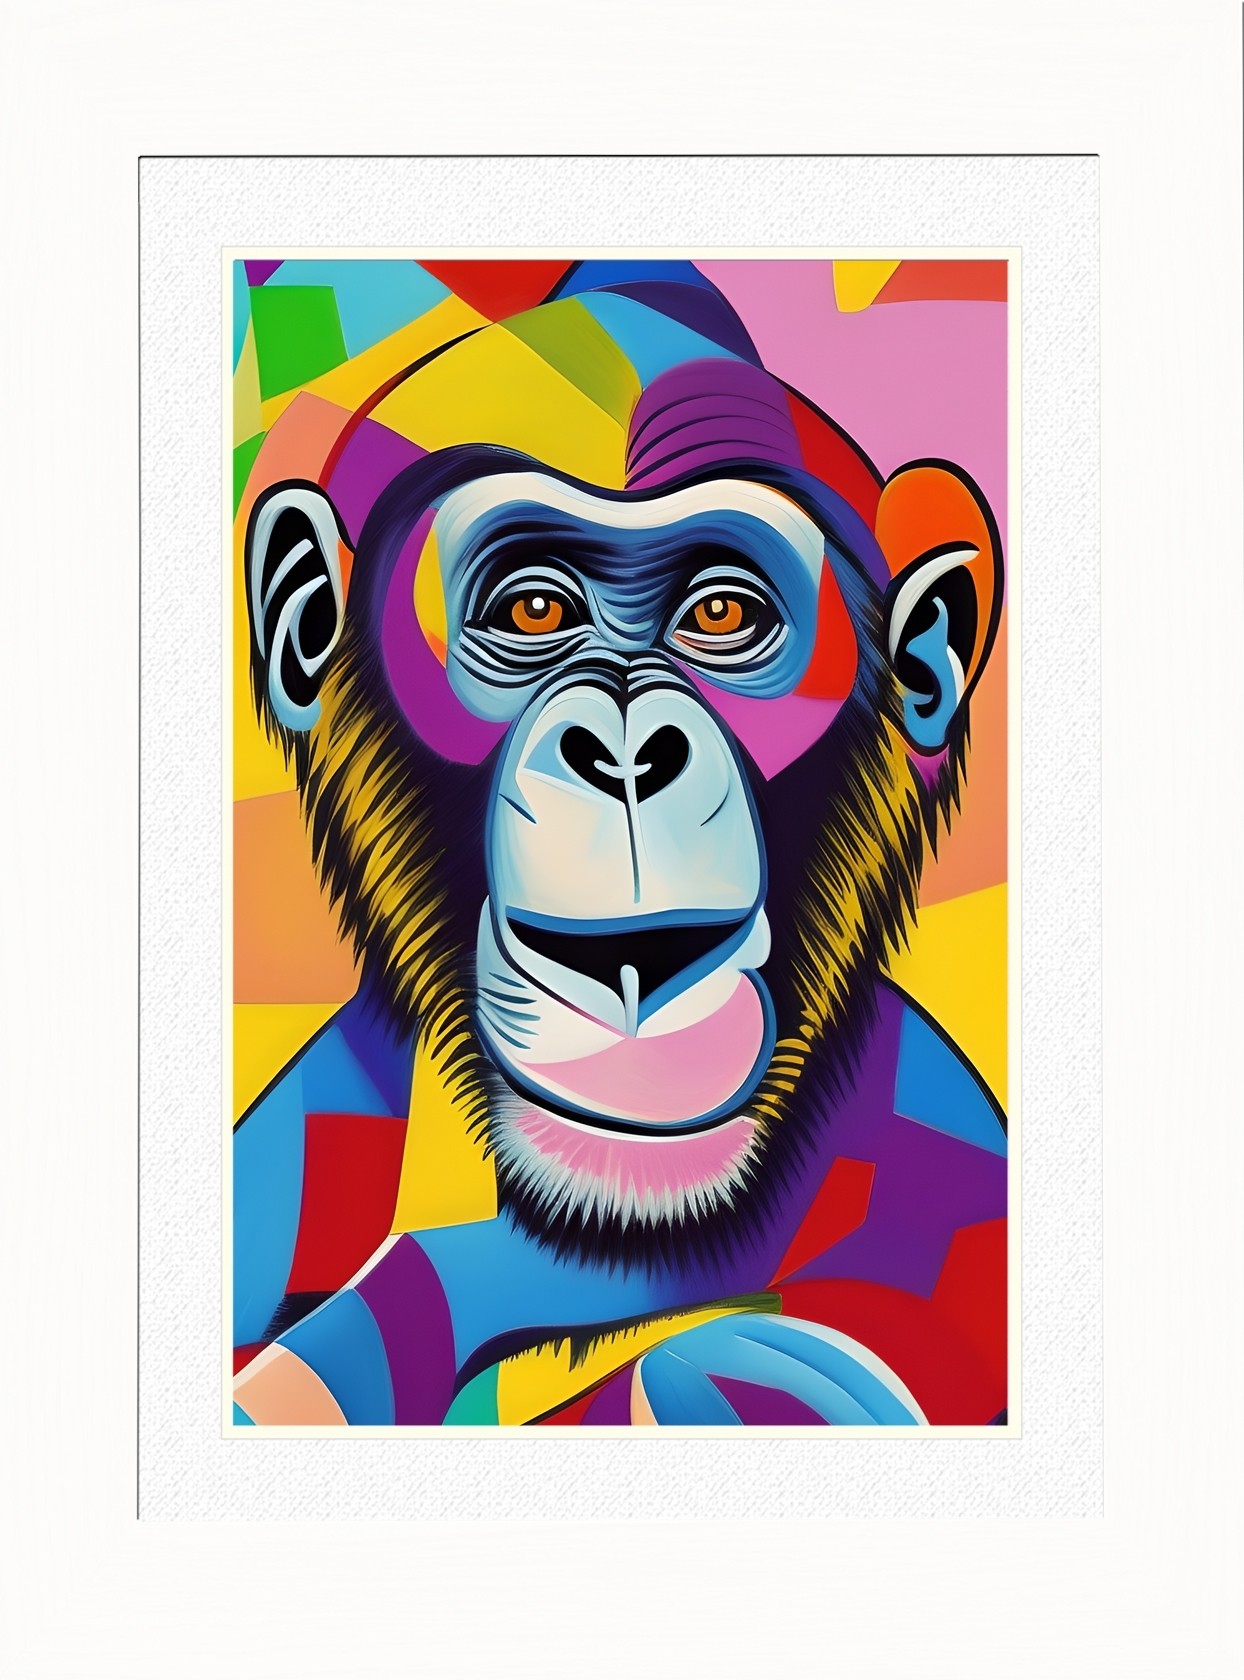 Monkey Chimpanzee Animal Picture Framed Colourful Abstract Art (A4 White Frame)